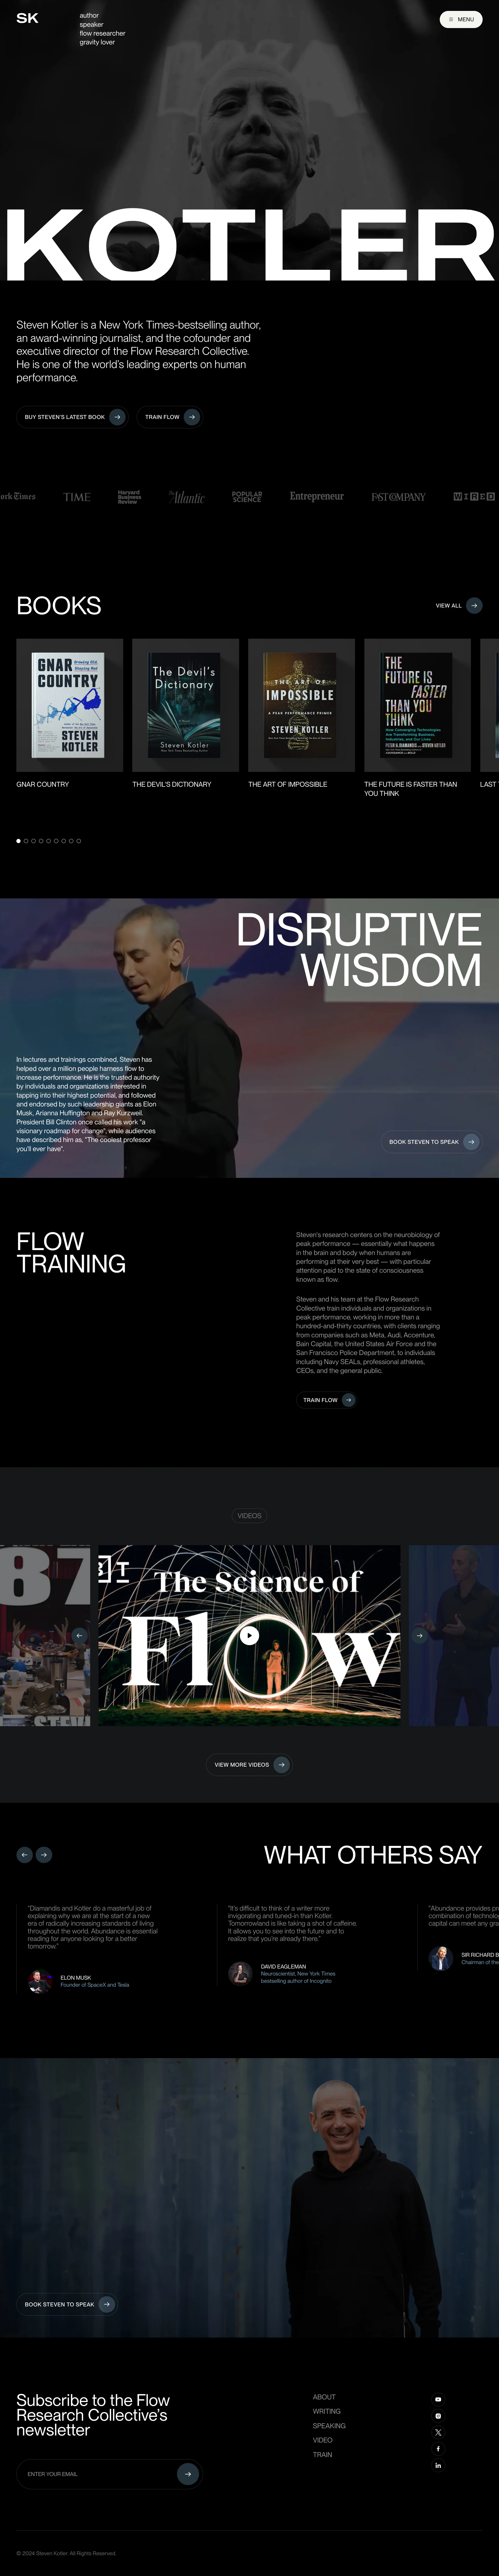 Steven Kotler Landing Page Example: Steven Kotler is a New York Times-bestselling author, an award-winning journalist, and the cofounder and executive director of the Flow Research Collective. He is one of the world’s leading experts on human performance.